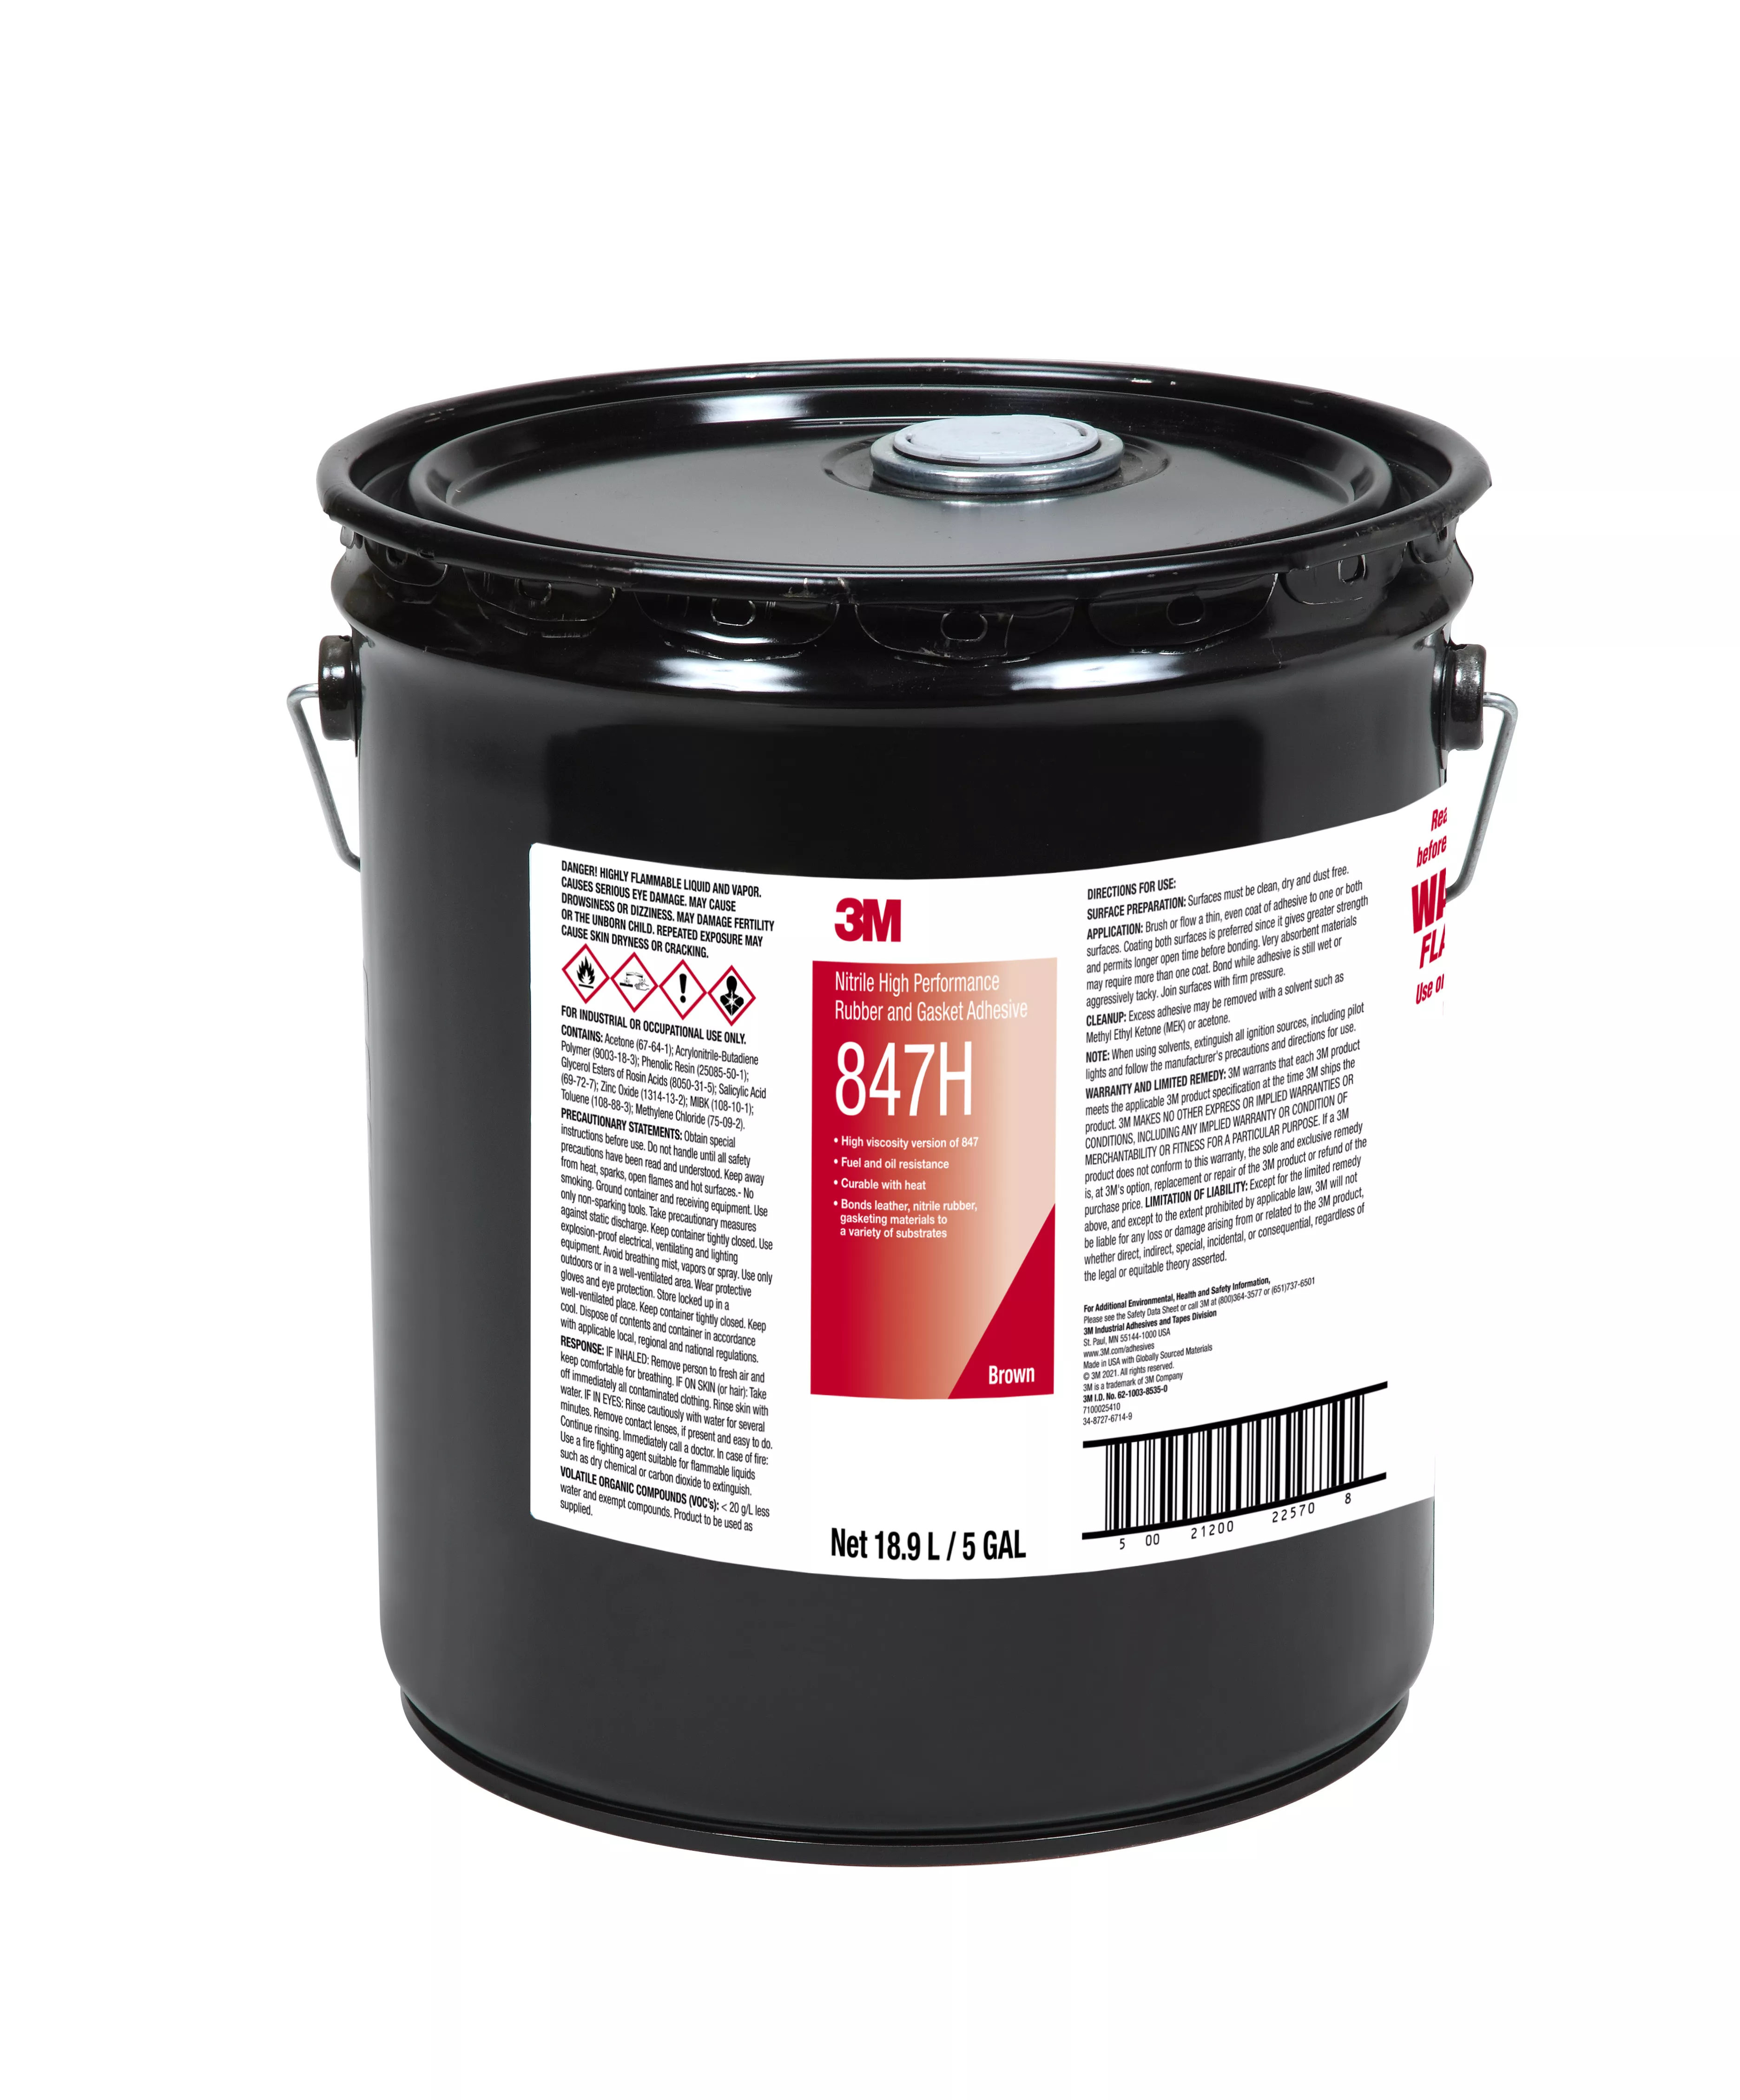 3M™ Nitrile High Performance Rubber and Gasket Adhesive 847H, Brown, 5
Gallon (Pail), Drum